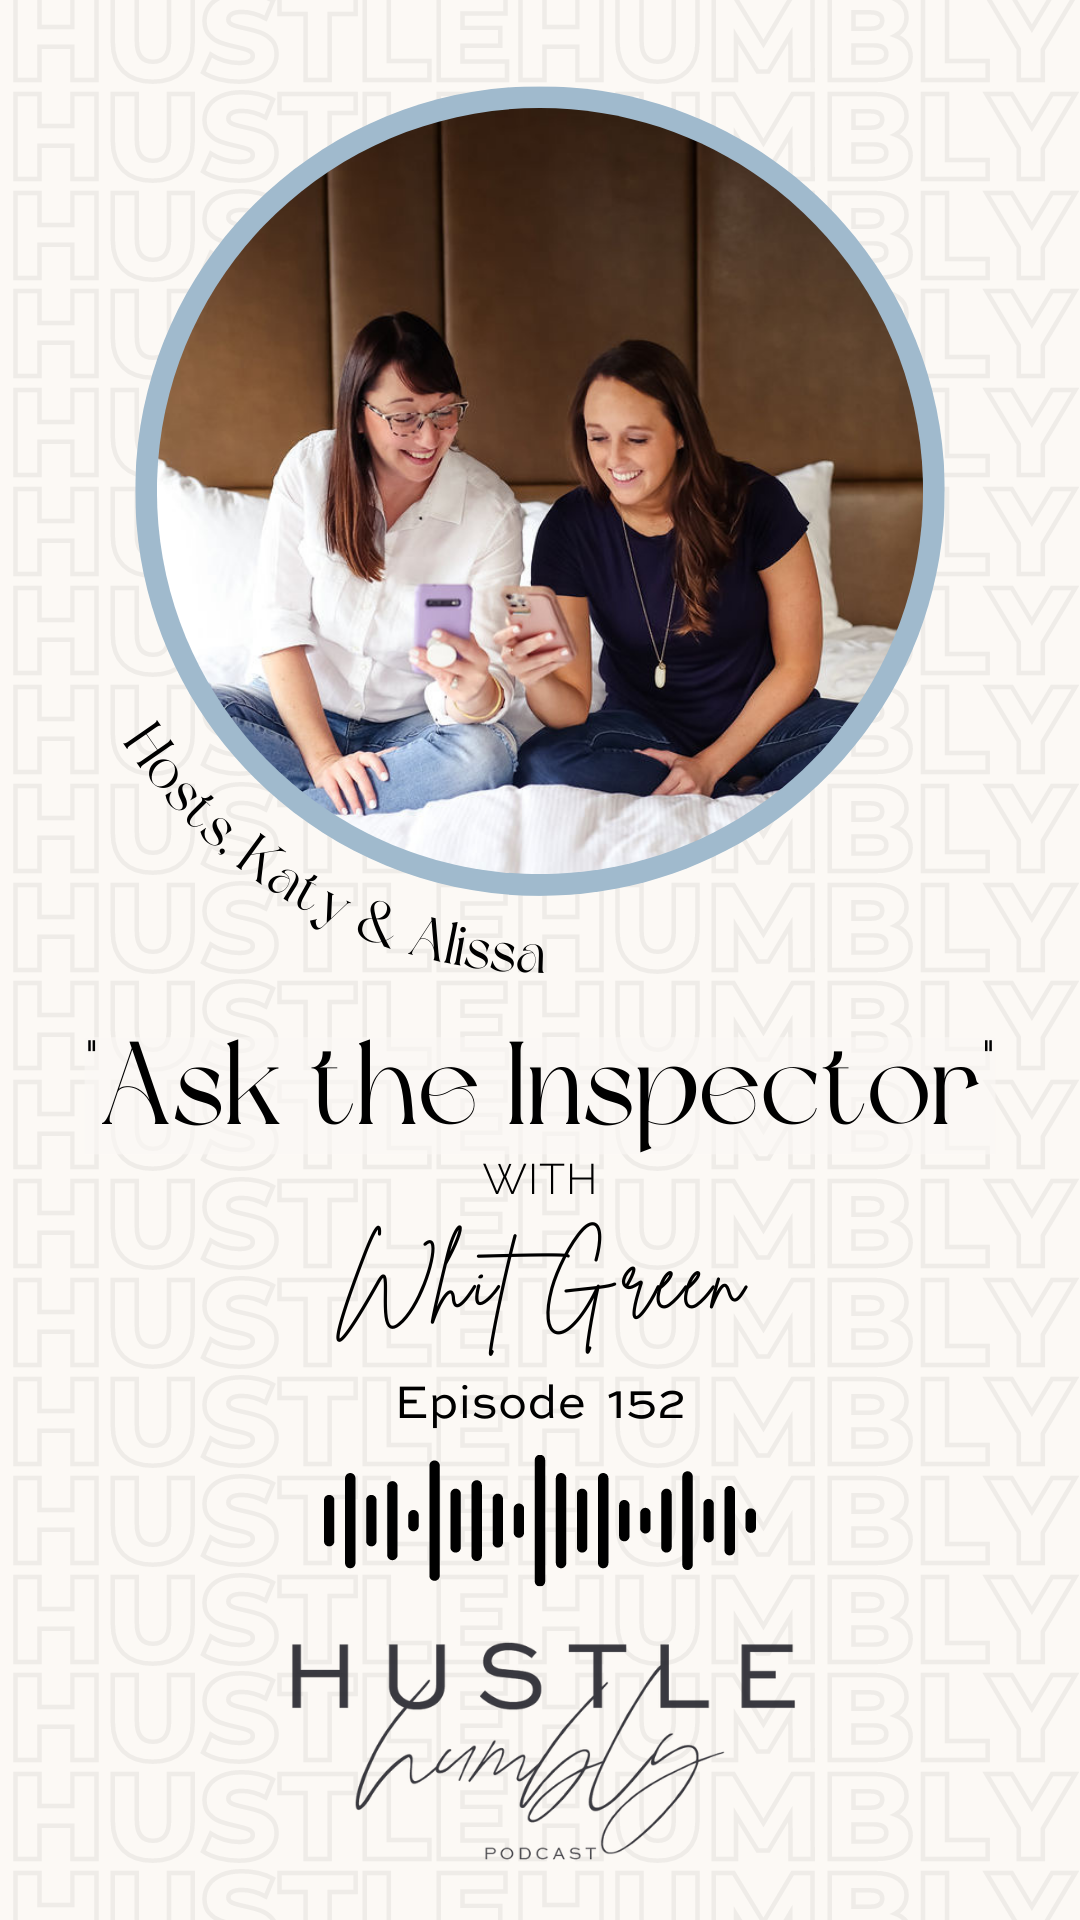 Hustle Humbly Podcast 152: Ask the Inspector